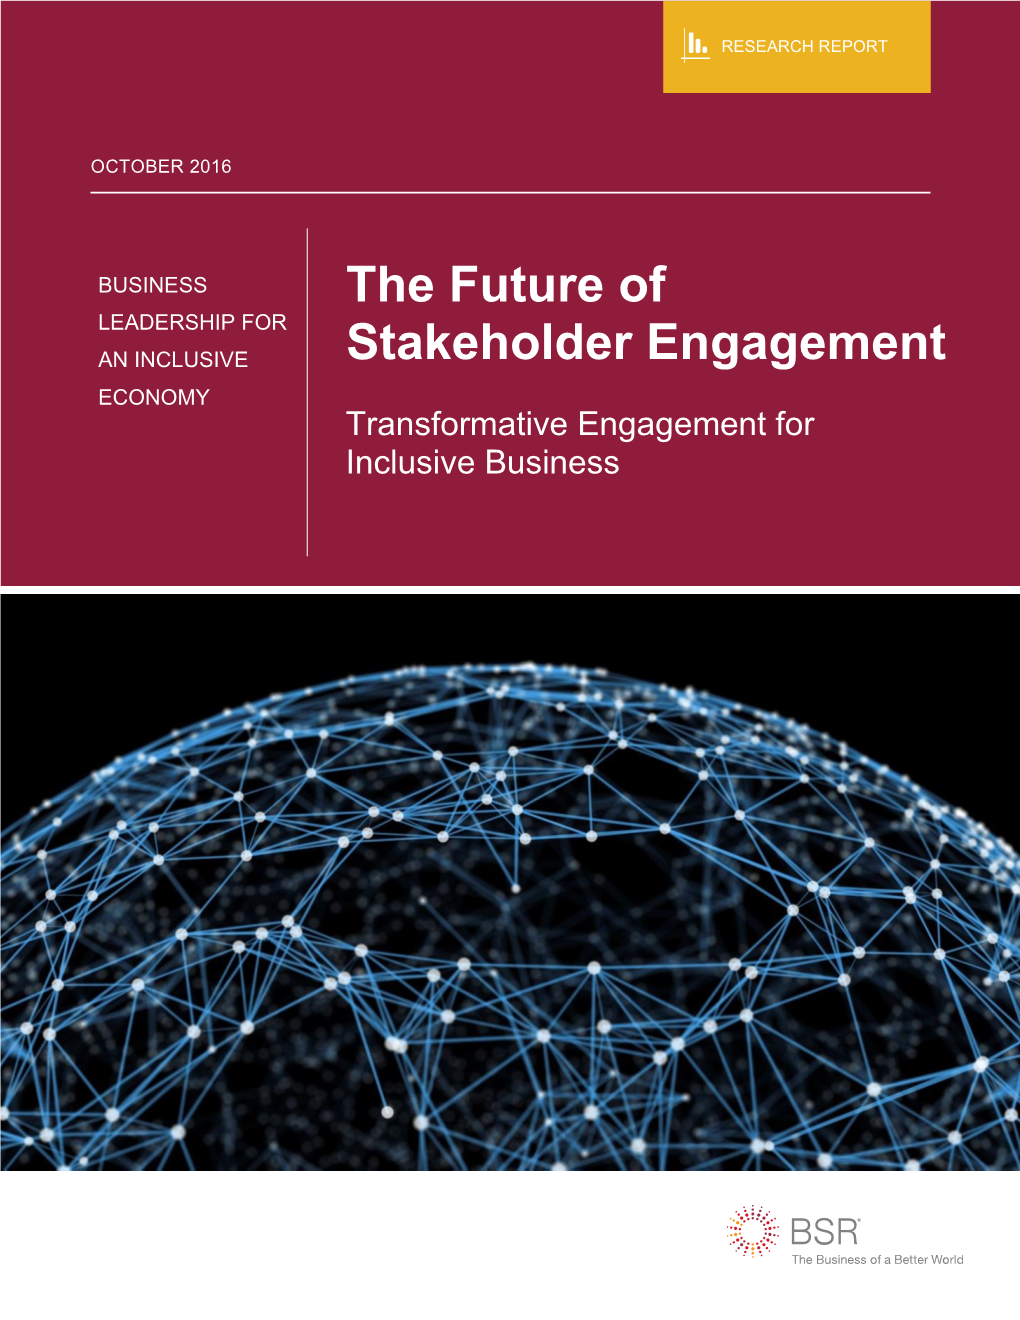 The Future of Stakeholder Engagement 1